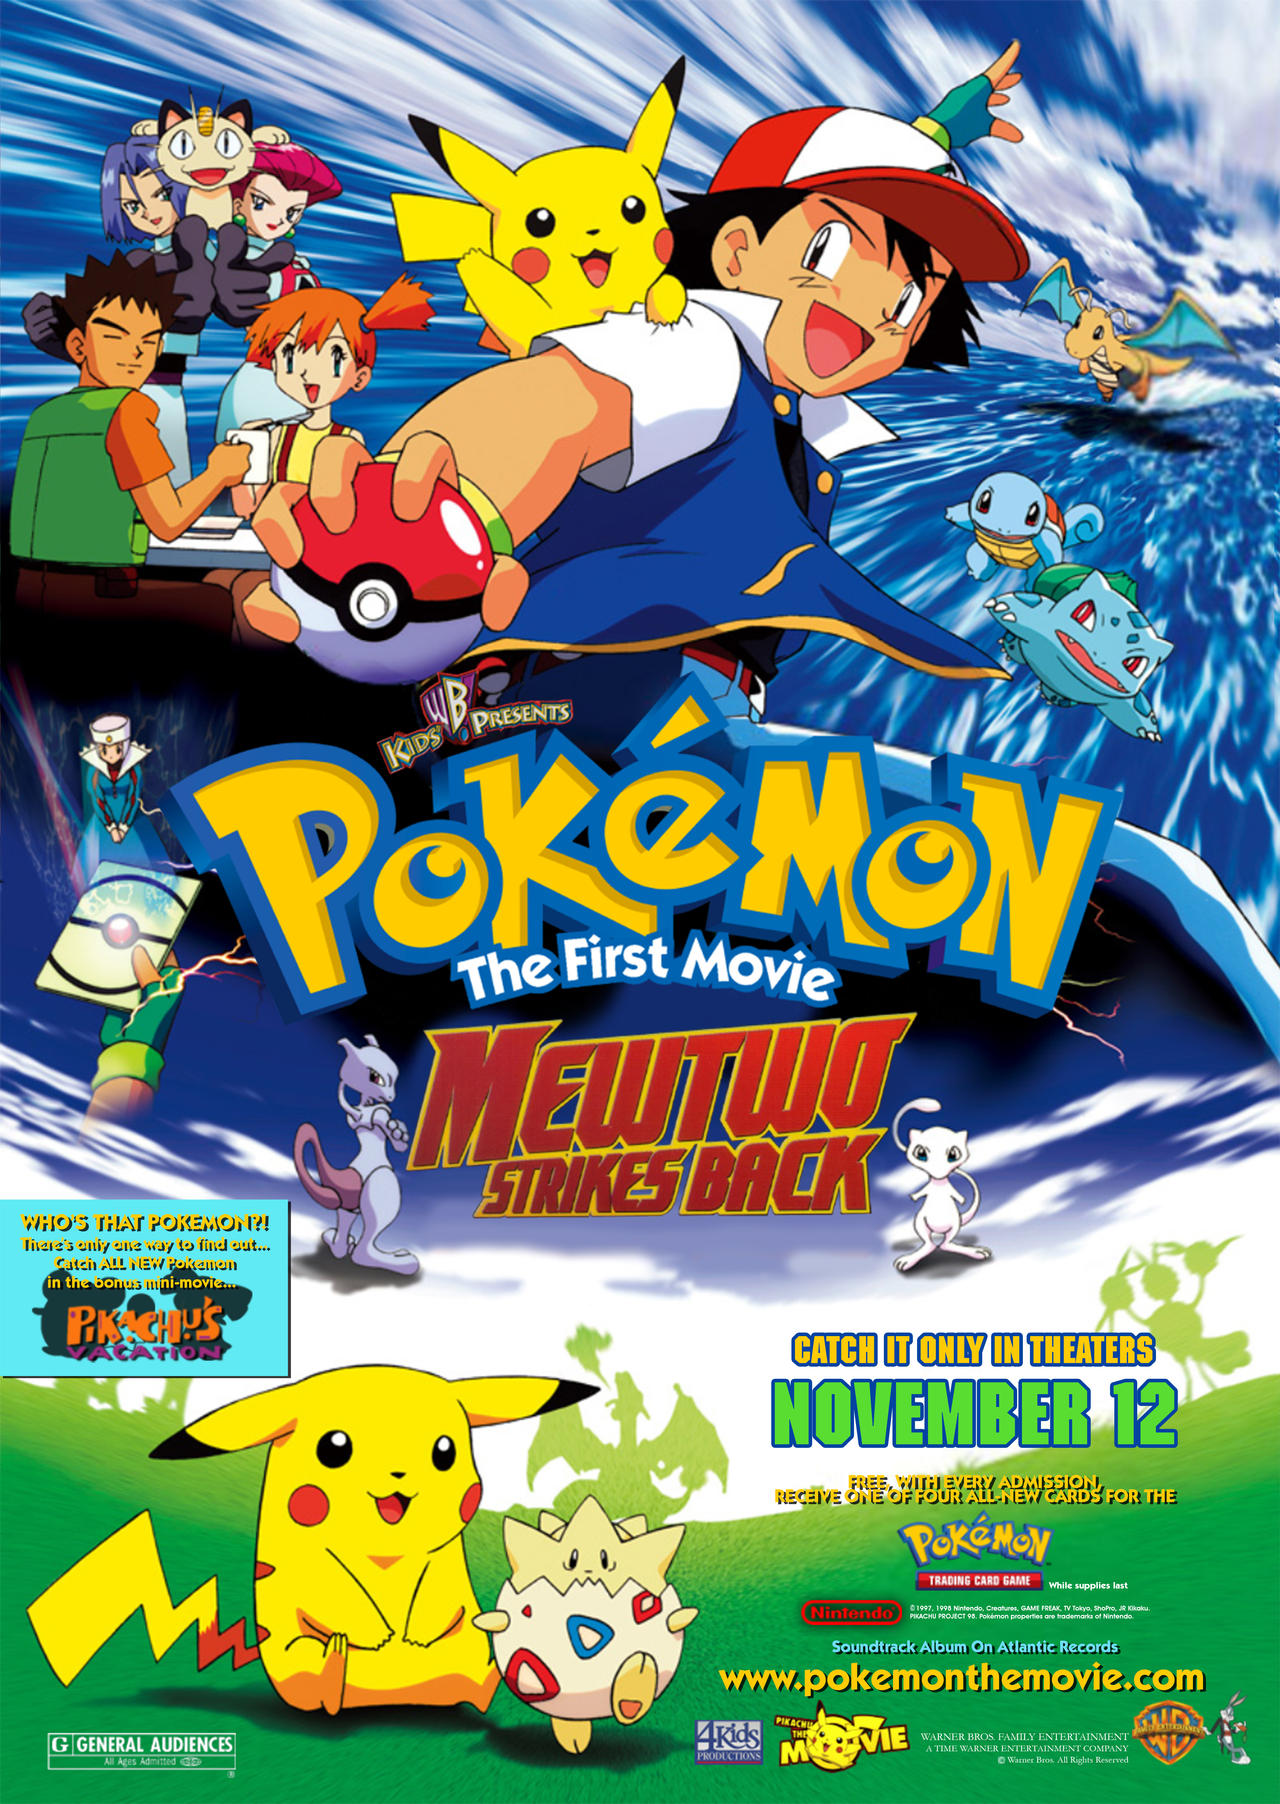 Pokemon The First Movie Japanese poster in ENG by Shortshaker on DeviantArt